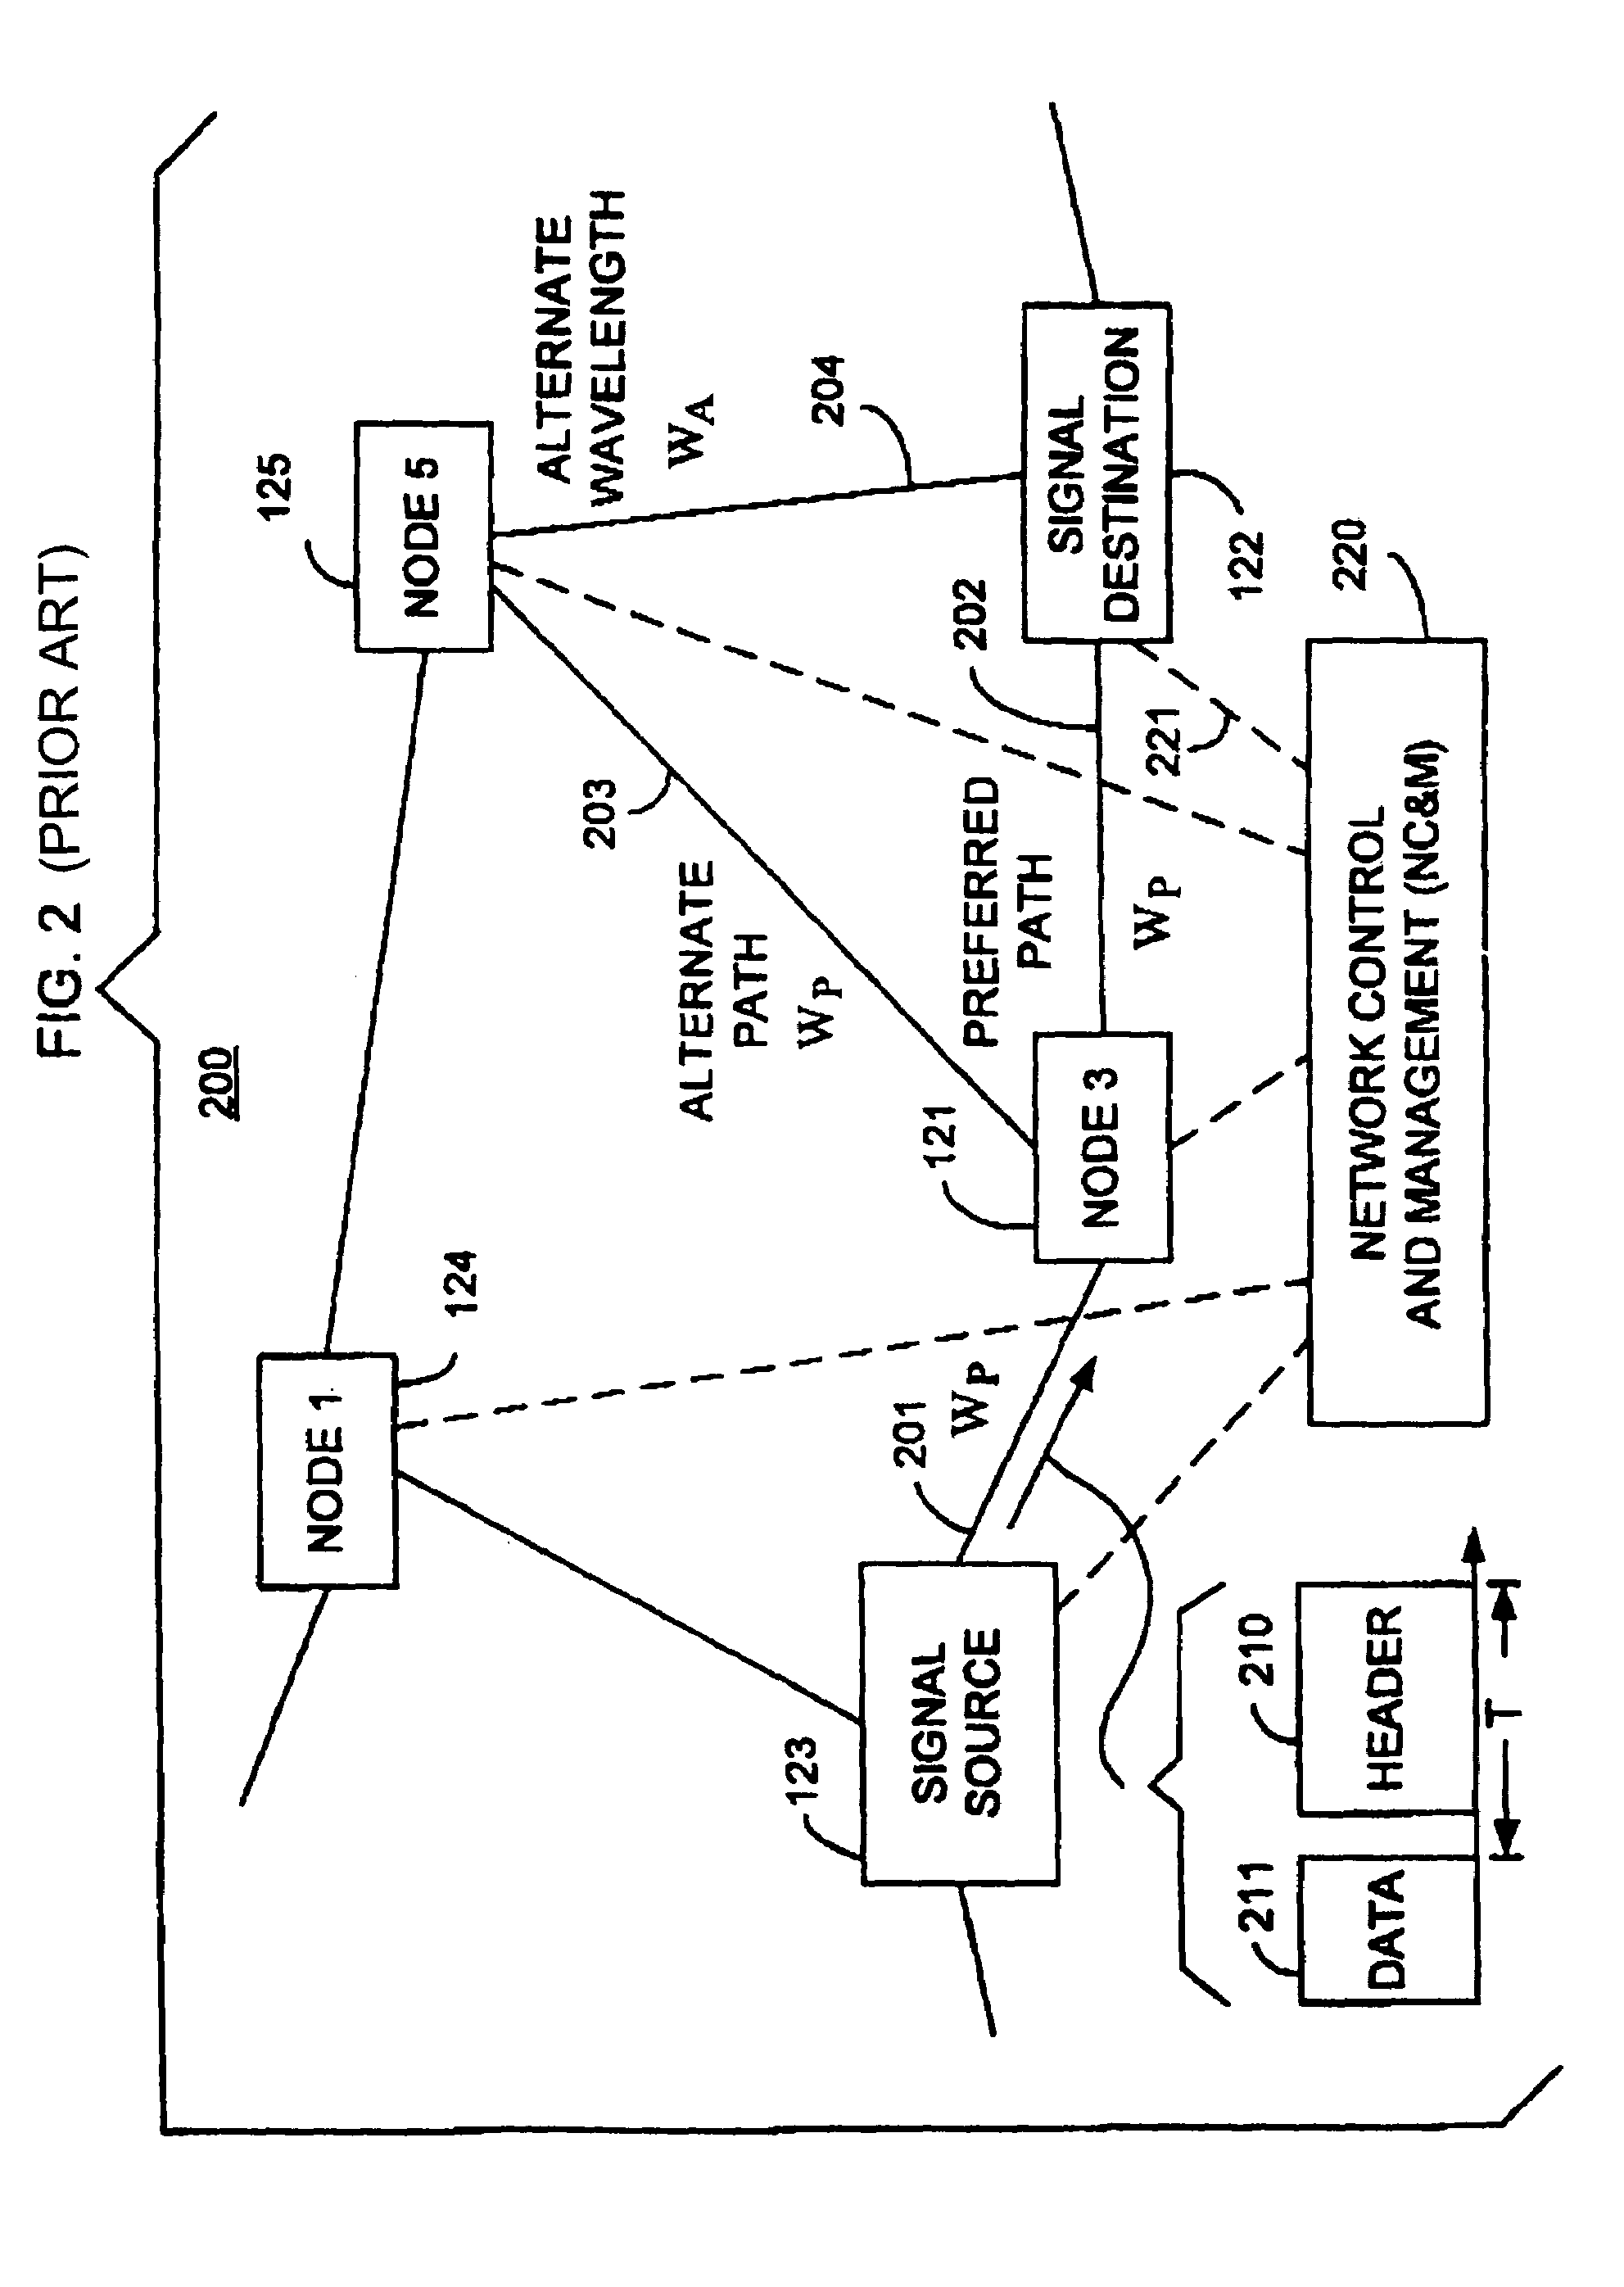 Optical layer multicasting using a multiple sub-carrier header and a multicast switch with active header insertion via reflective single sideband optical processing